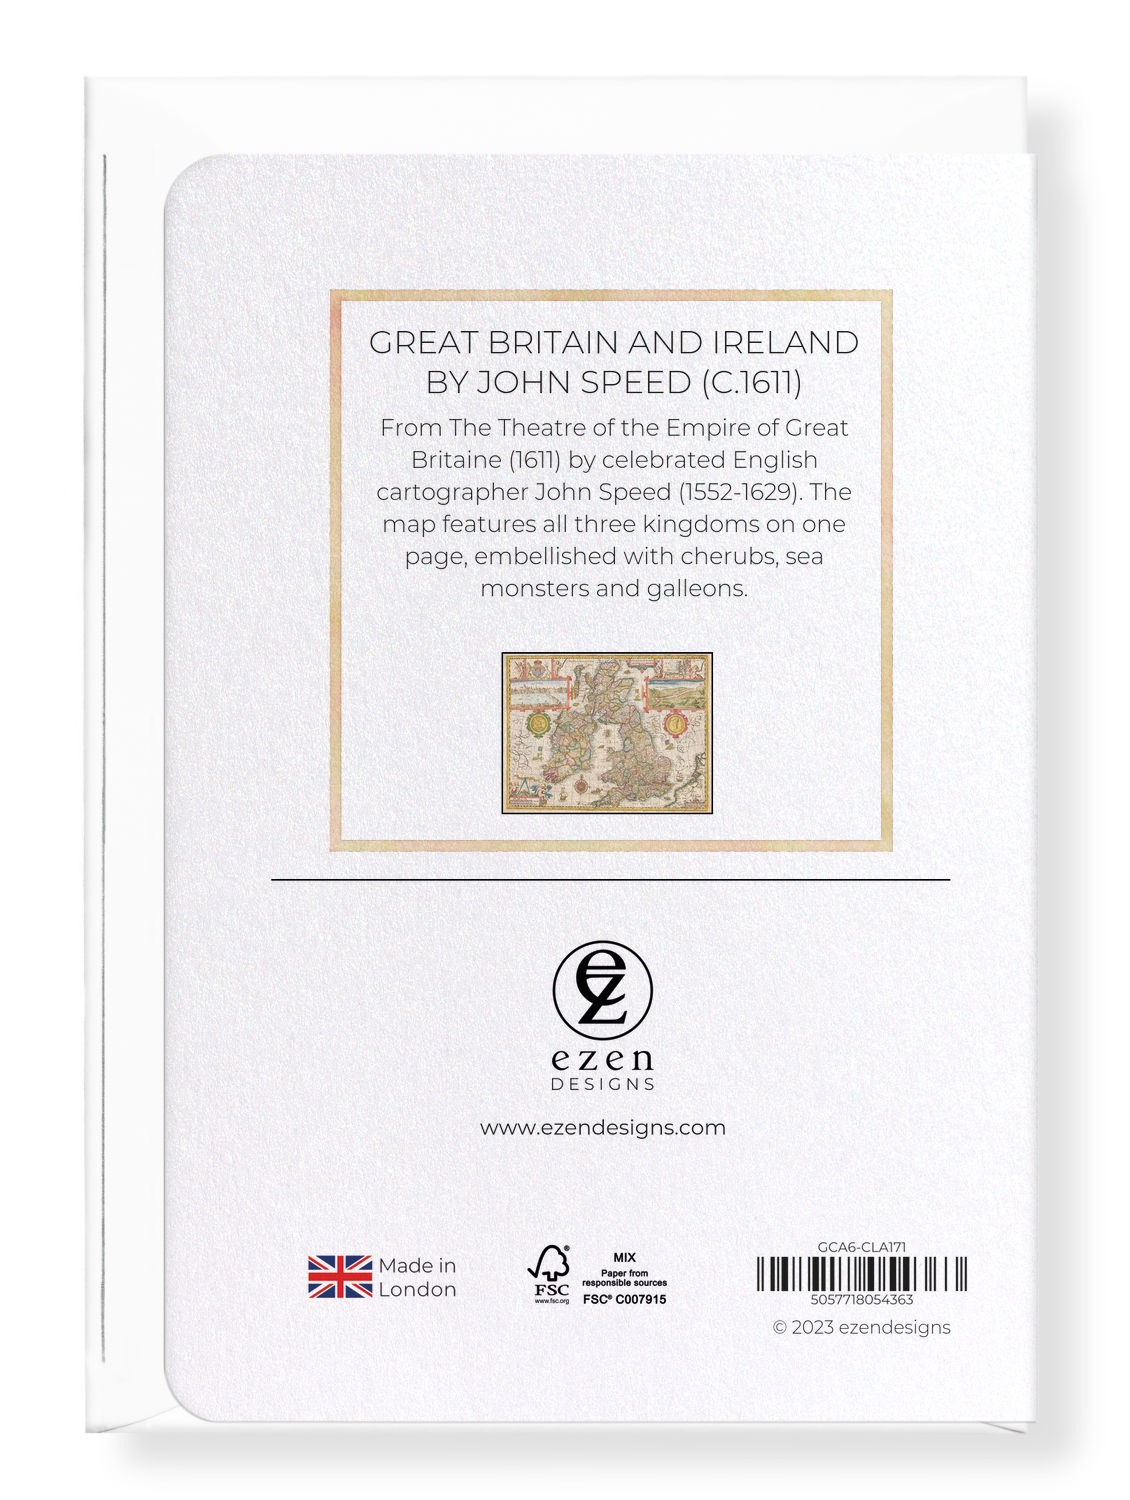 Ezen Designs - Great Britain and Ireland BY JOHN SPEED (C.1611) - Greeting Card - Back